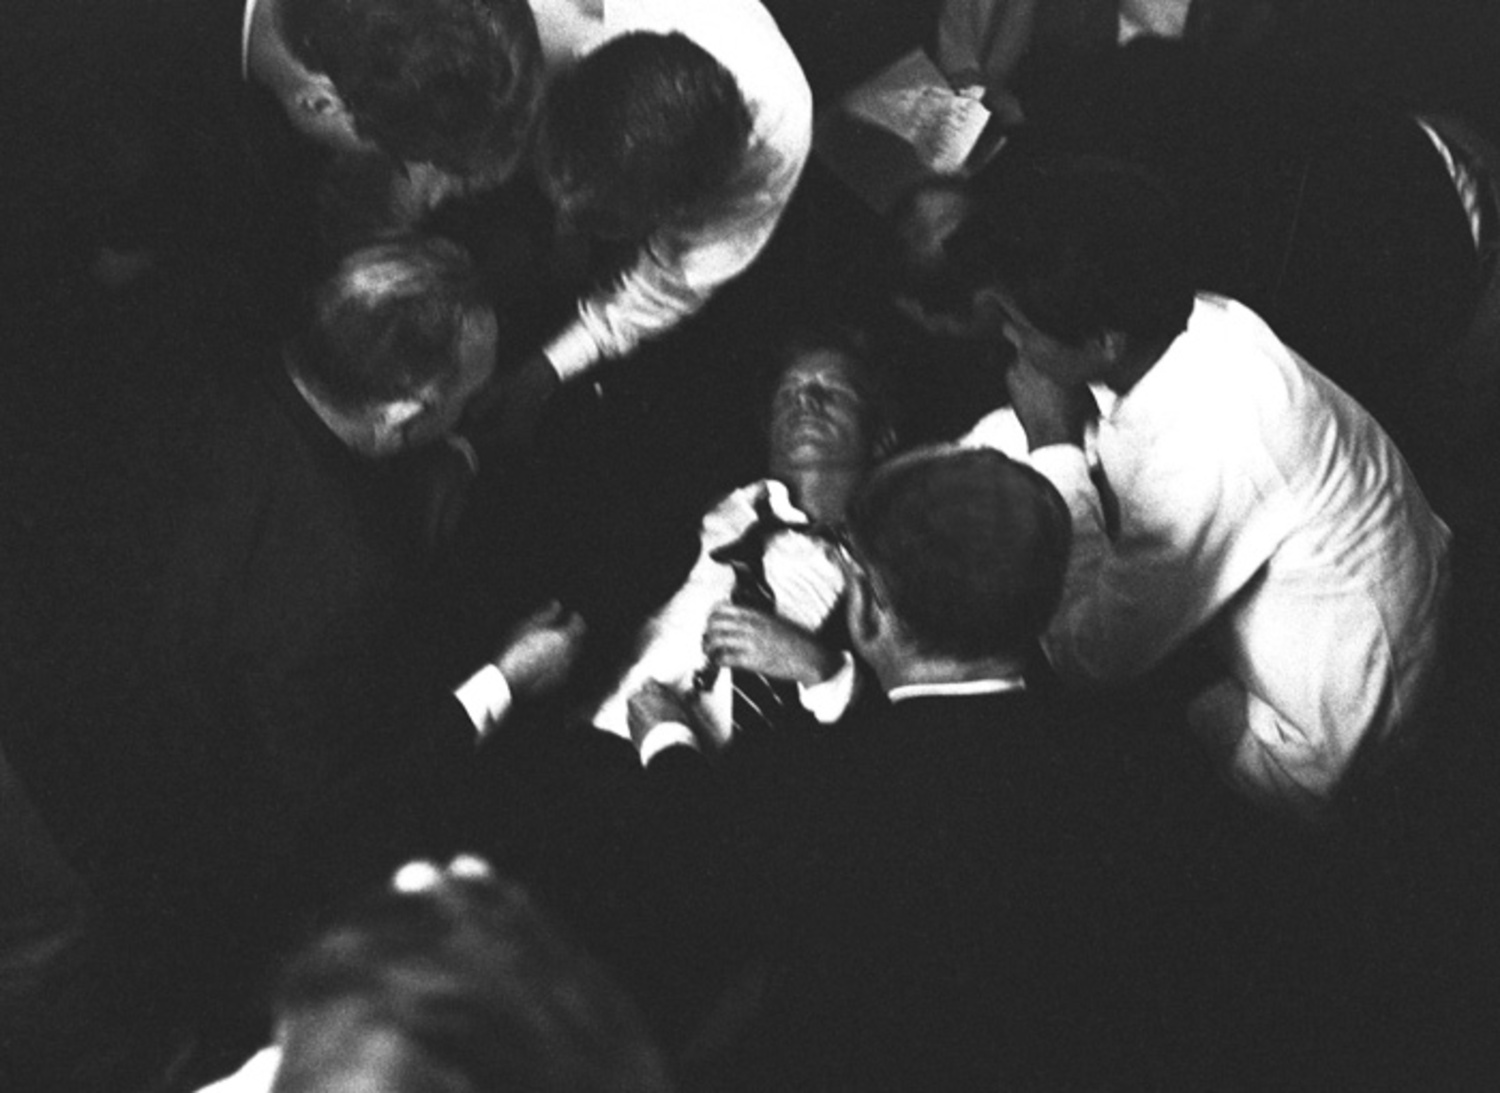 Harry Benson's photograph of Robert F. Kennedy after he was shot at the Ambassador Hotel on June 5, 1968. COURTESY SOUTHAMPTON ARTS CENTER